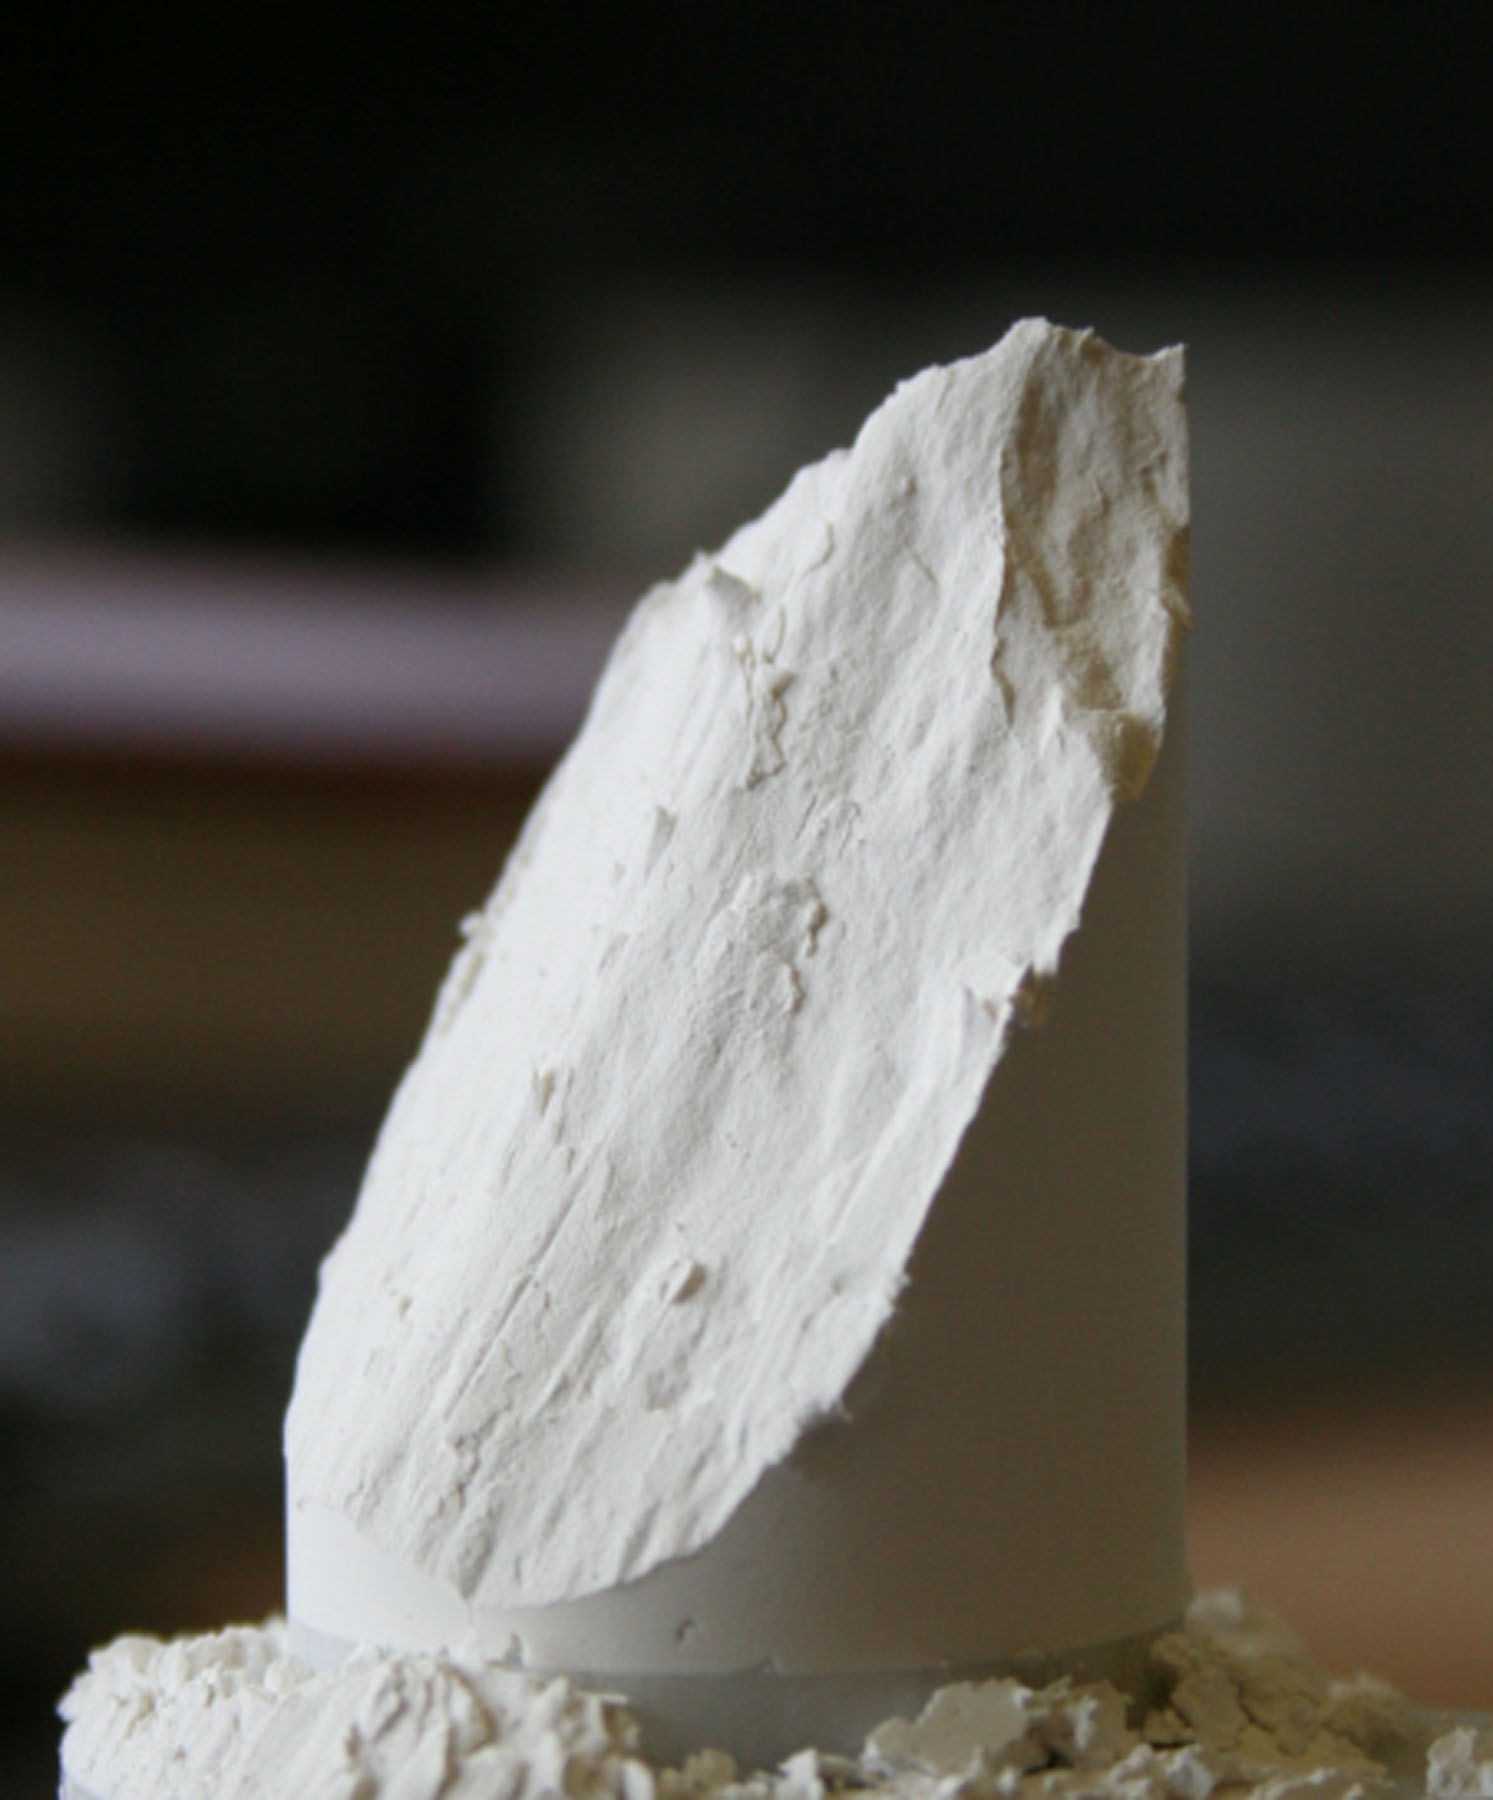 Powder after it has been failed in a uniaxial test